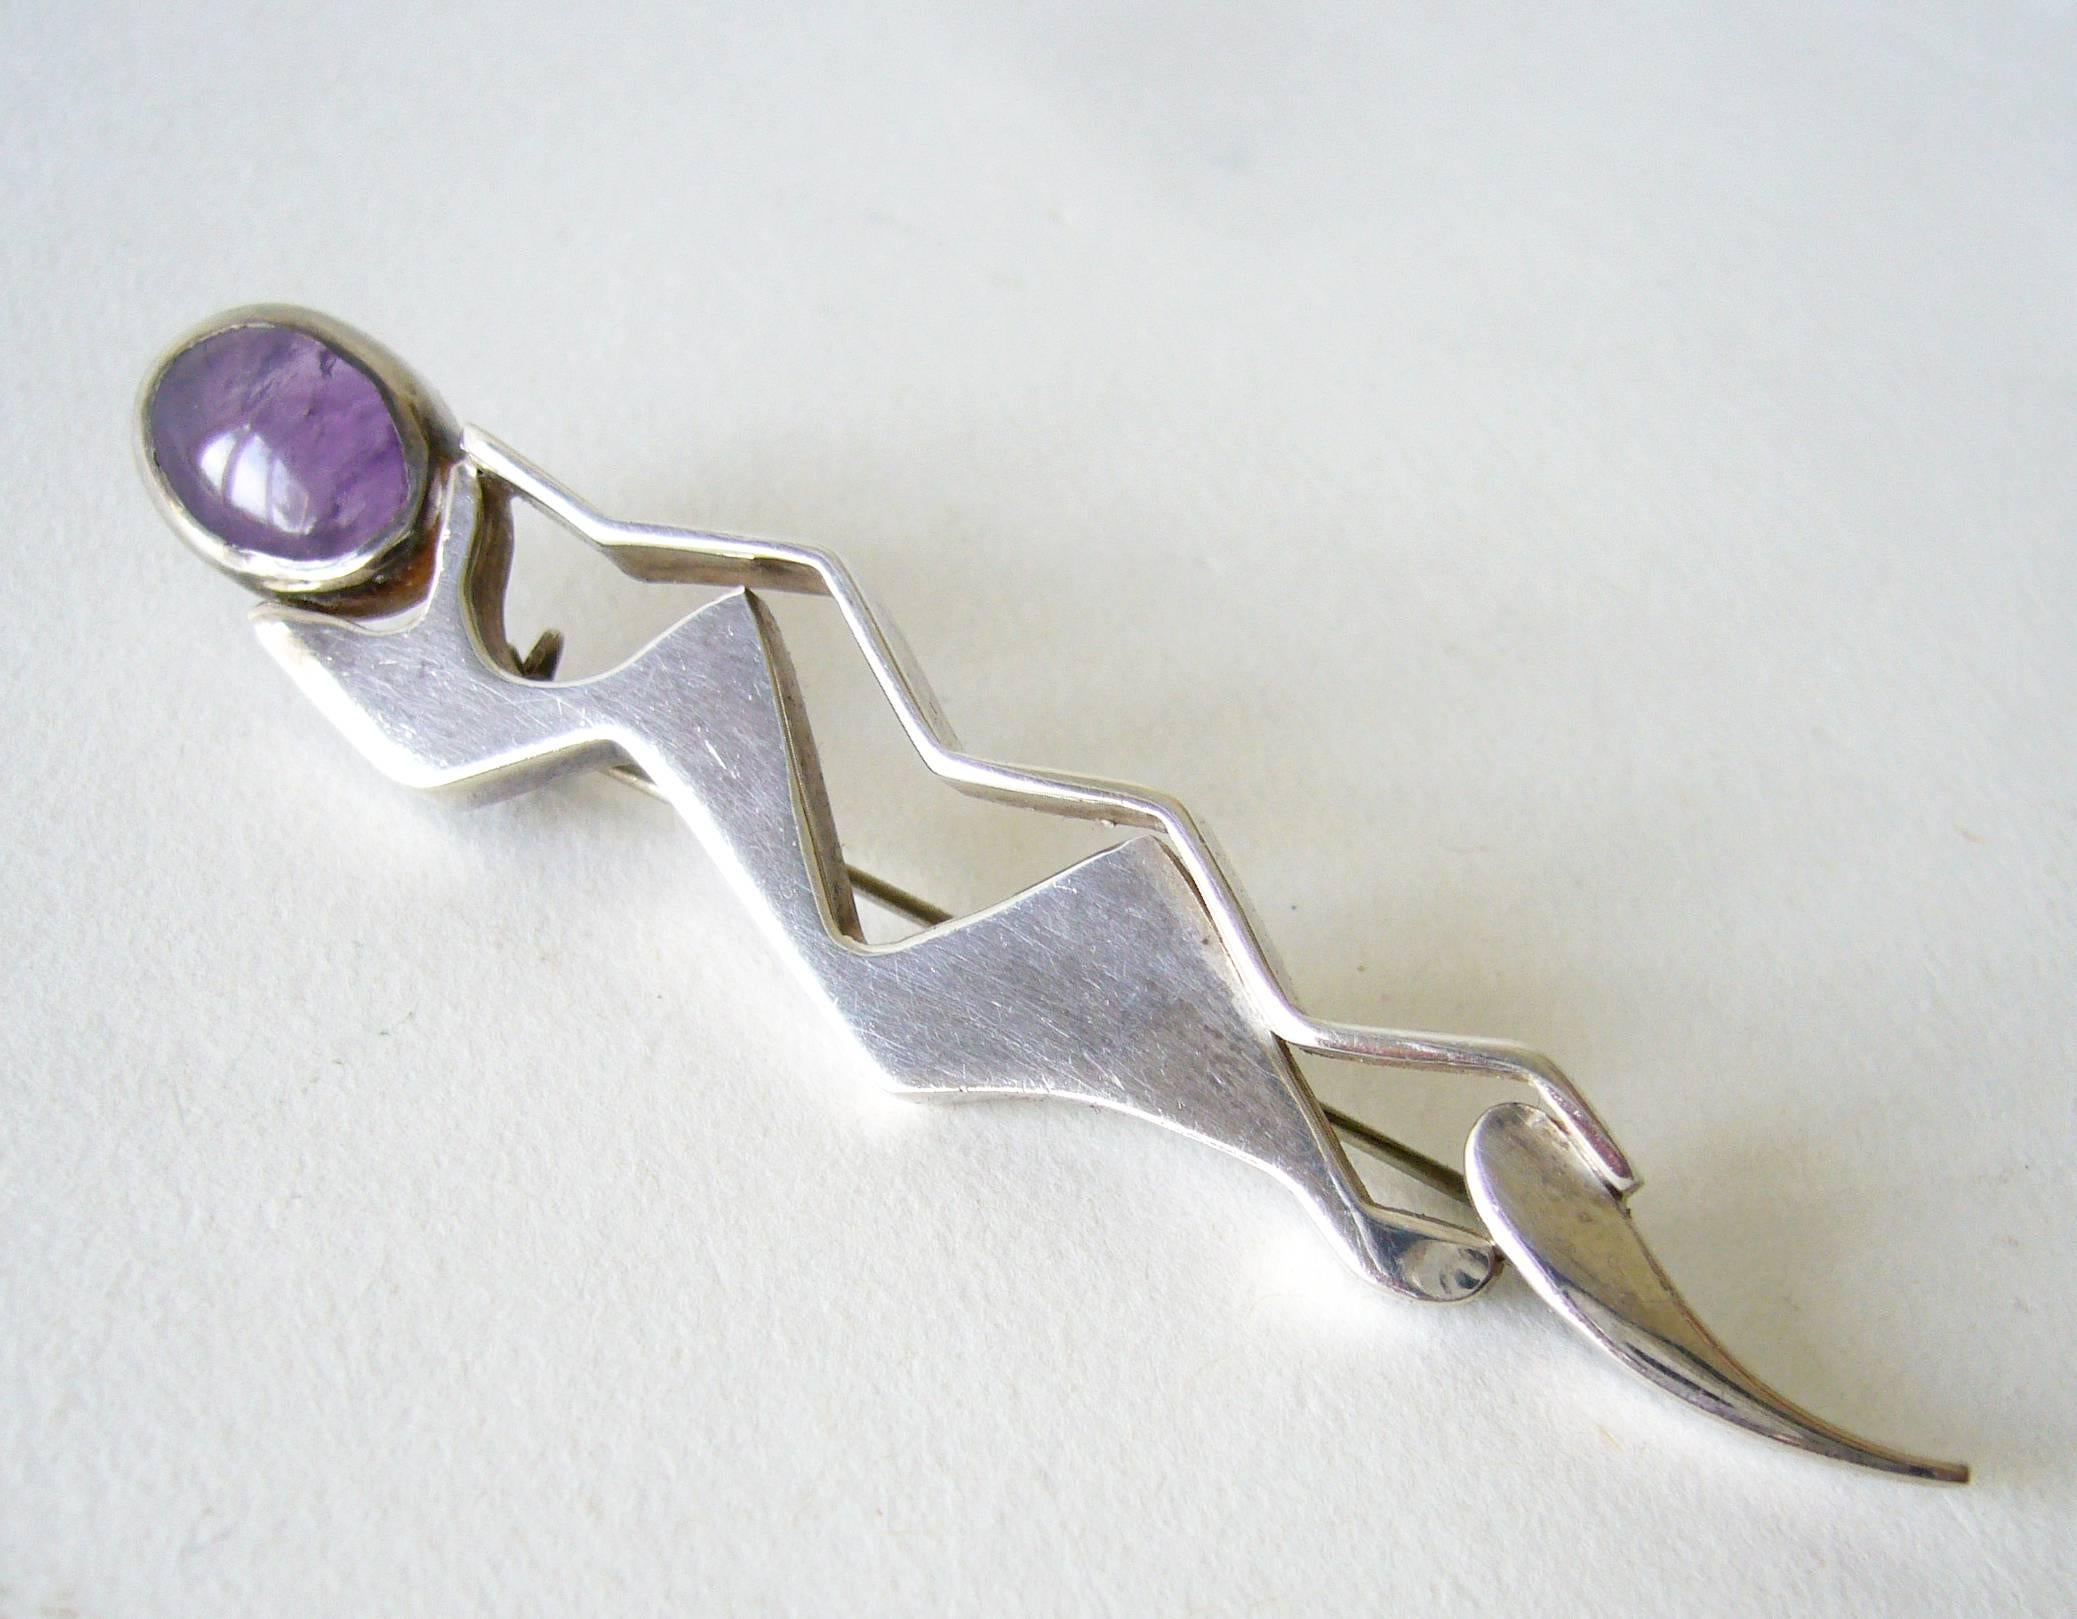 Sterling silver with amethyst cabochon created by Suzanne Somogy of Paris, France circa 1970's.  Brooch measures 3.25" long by .75" and is signed Somogy on verso.  Acquired from the estate of the artist, Suzanne Somogy.  In very good